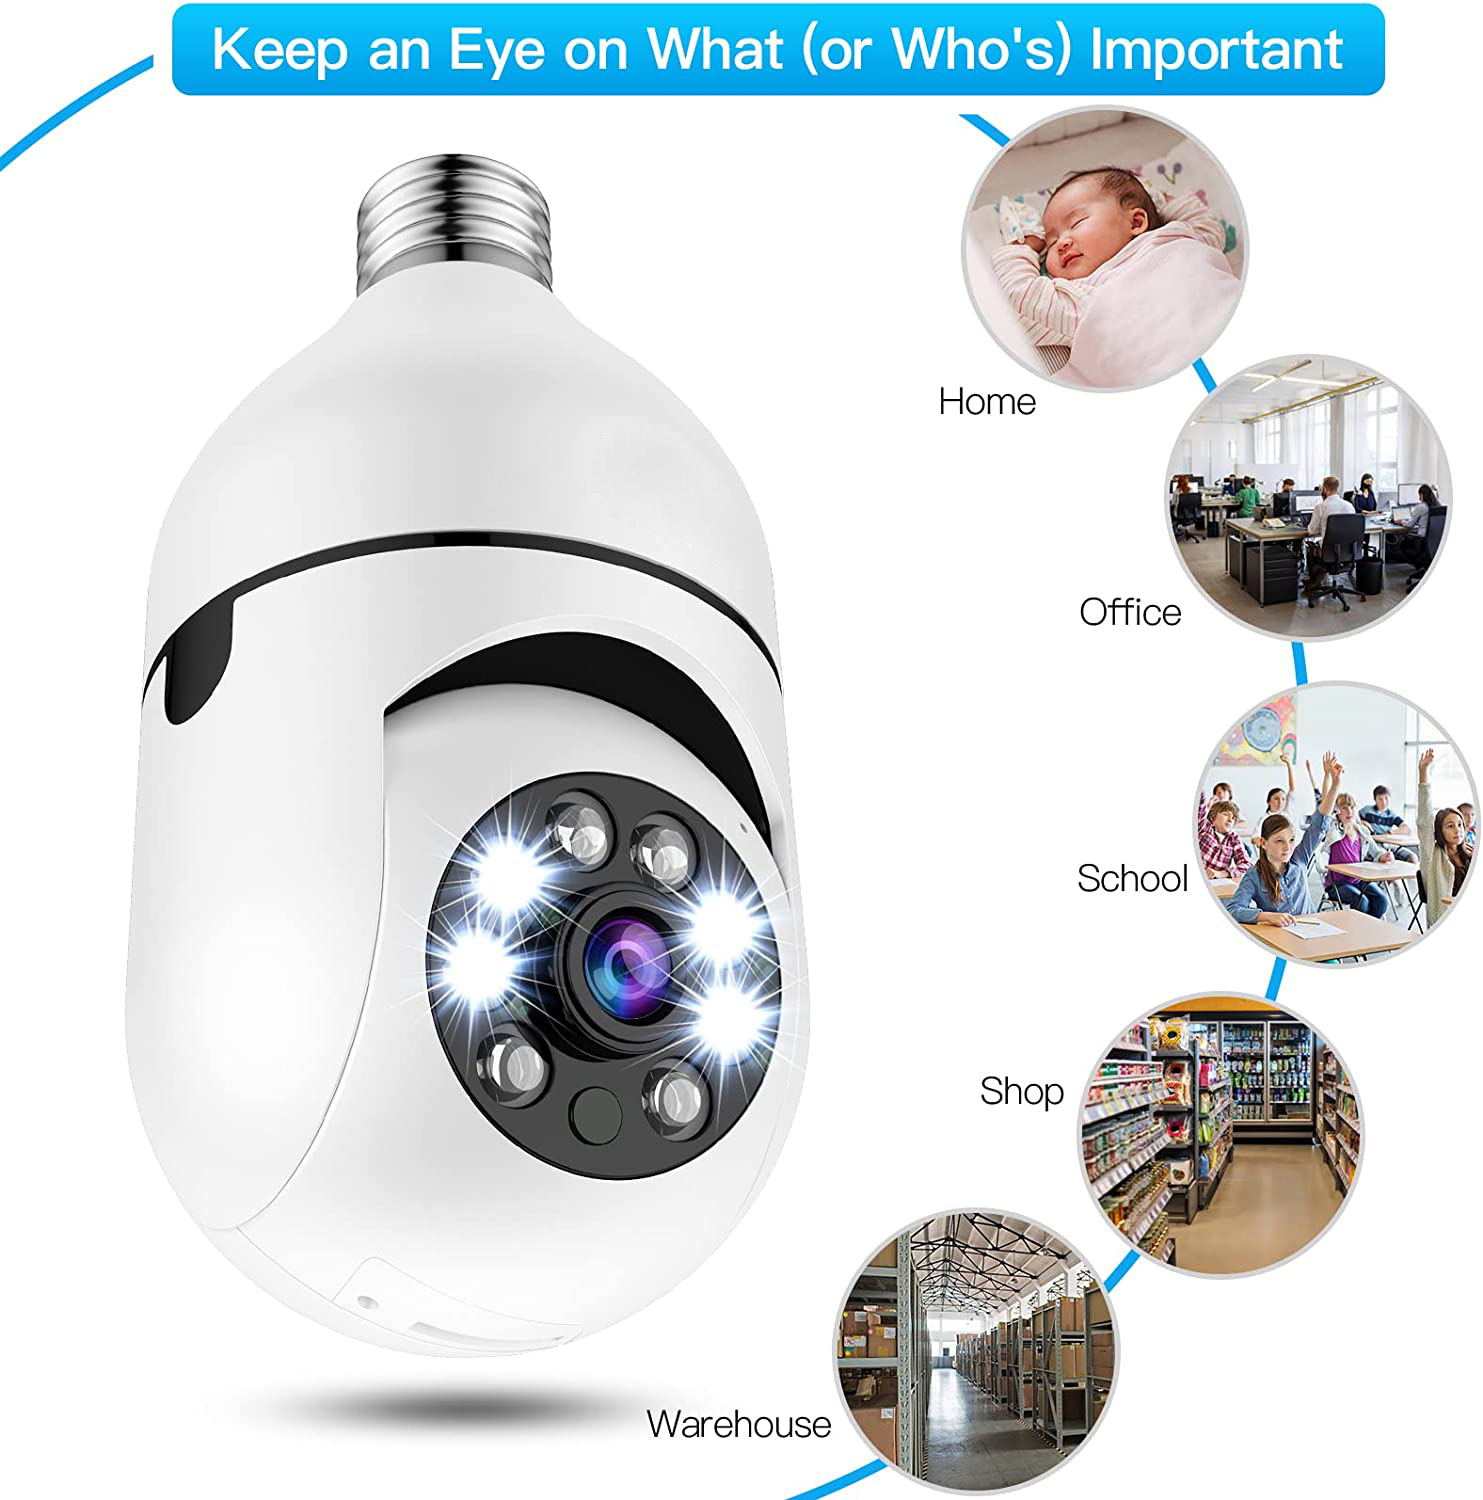 Security-Cameras-2-4Ghz-WIFI-Wireless-Light-Security-Camera-with-Alexa-1080P-HD-Indoor-E27-Bulb-Home-Cam-with-2-Way-Audio-Night-Vision-Human-Motion-Detection-Alarm-23